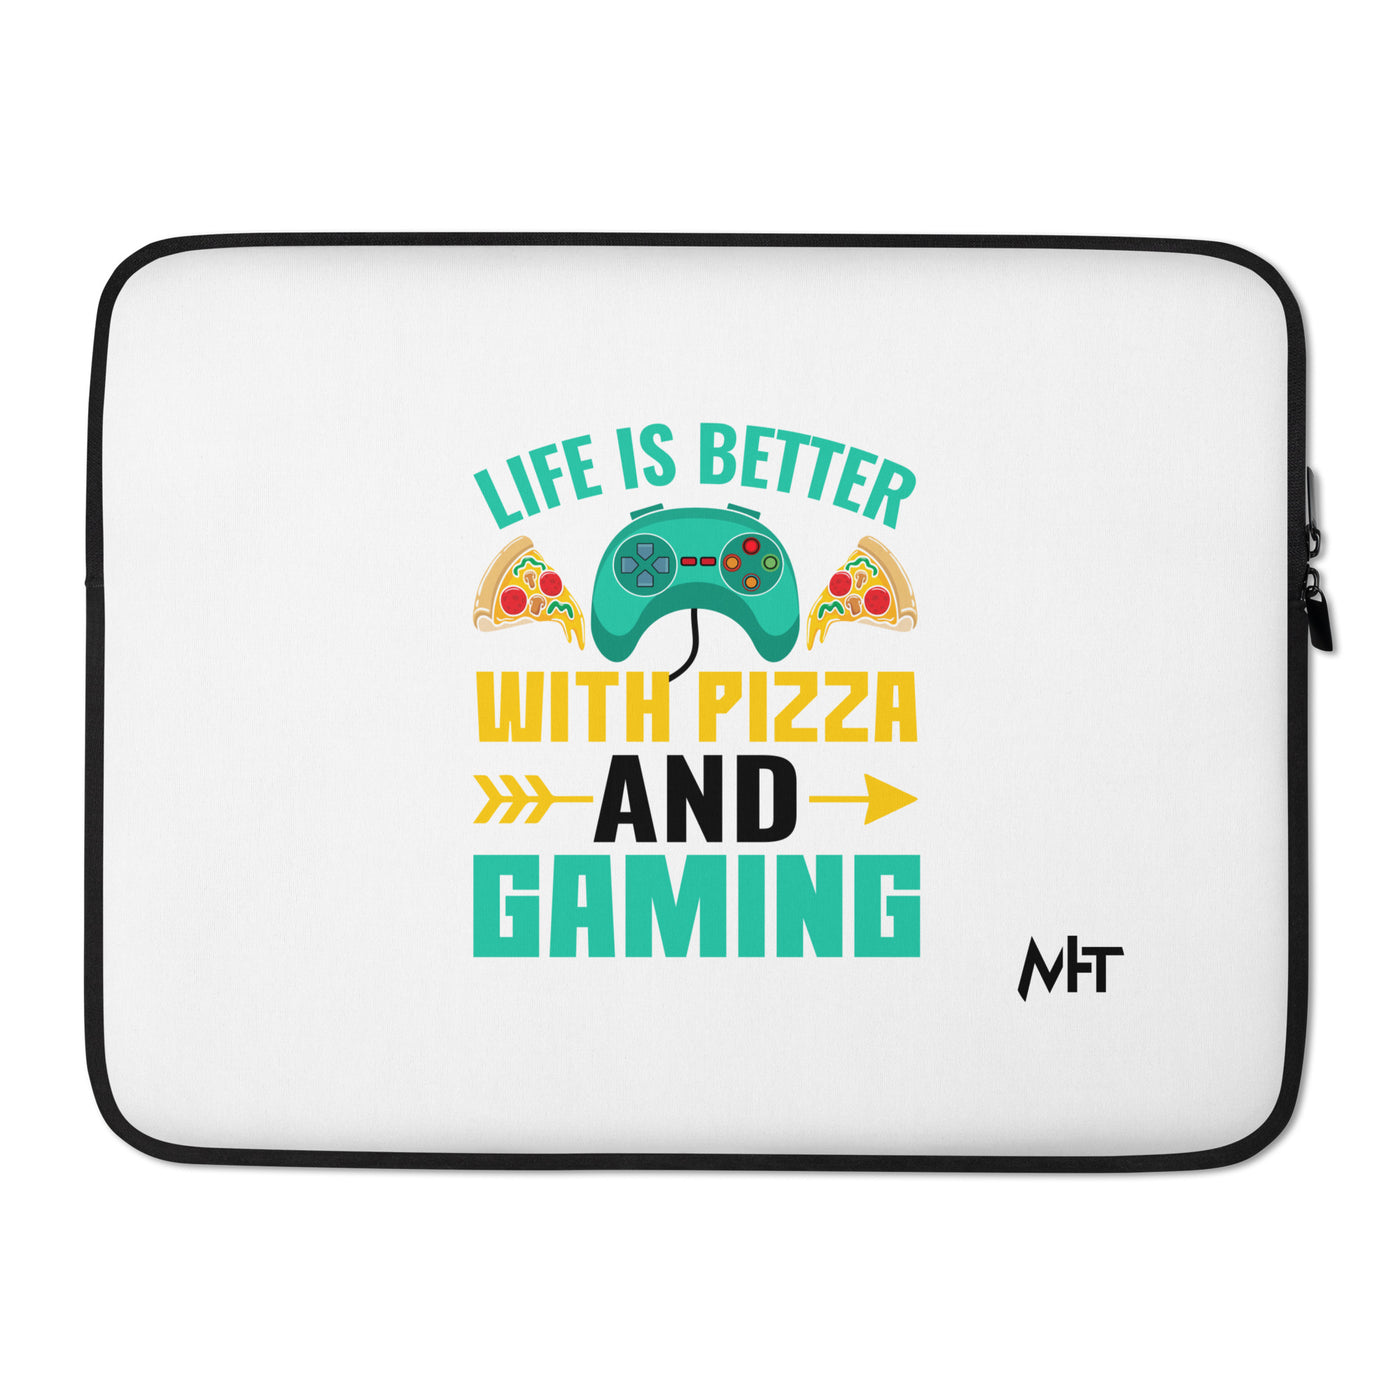 Life is Better With Pizza and Gaming Rima 14 in Dark Text - Laptop Sleeve